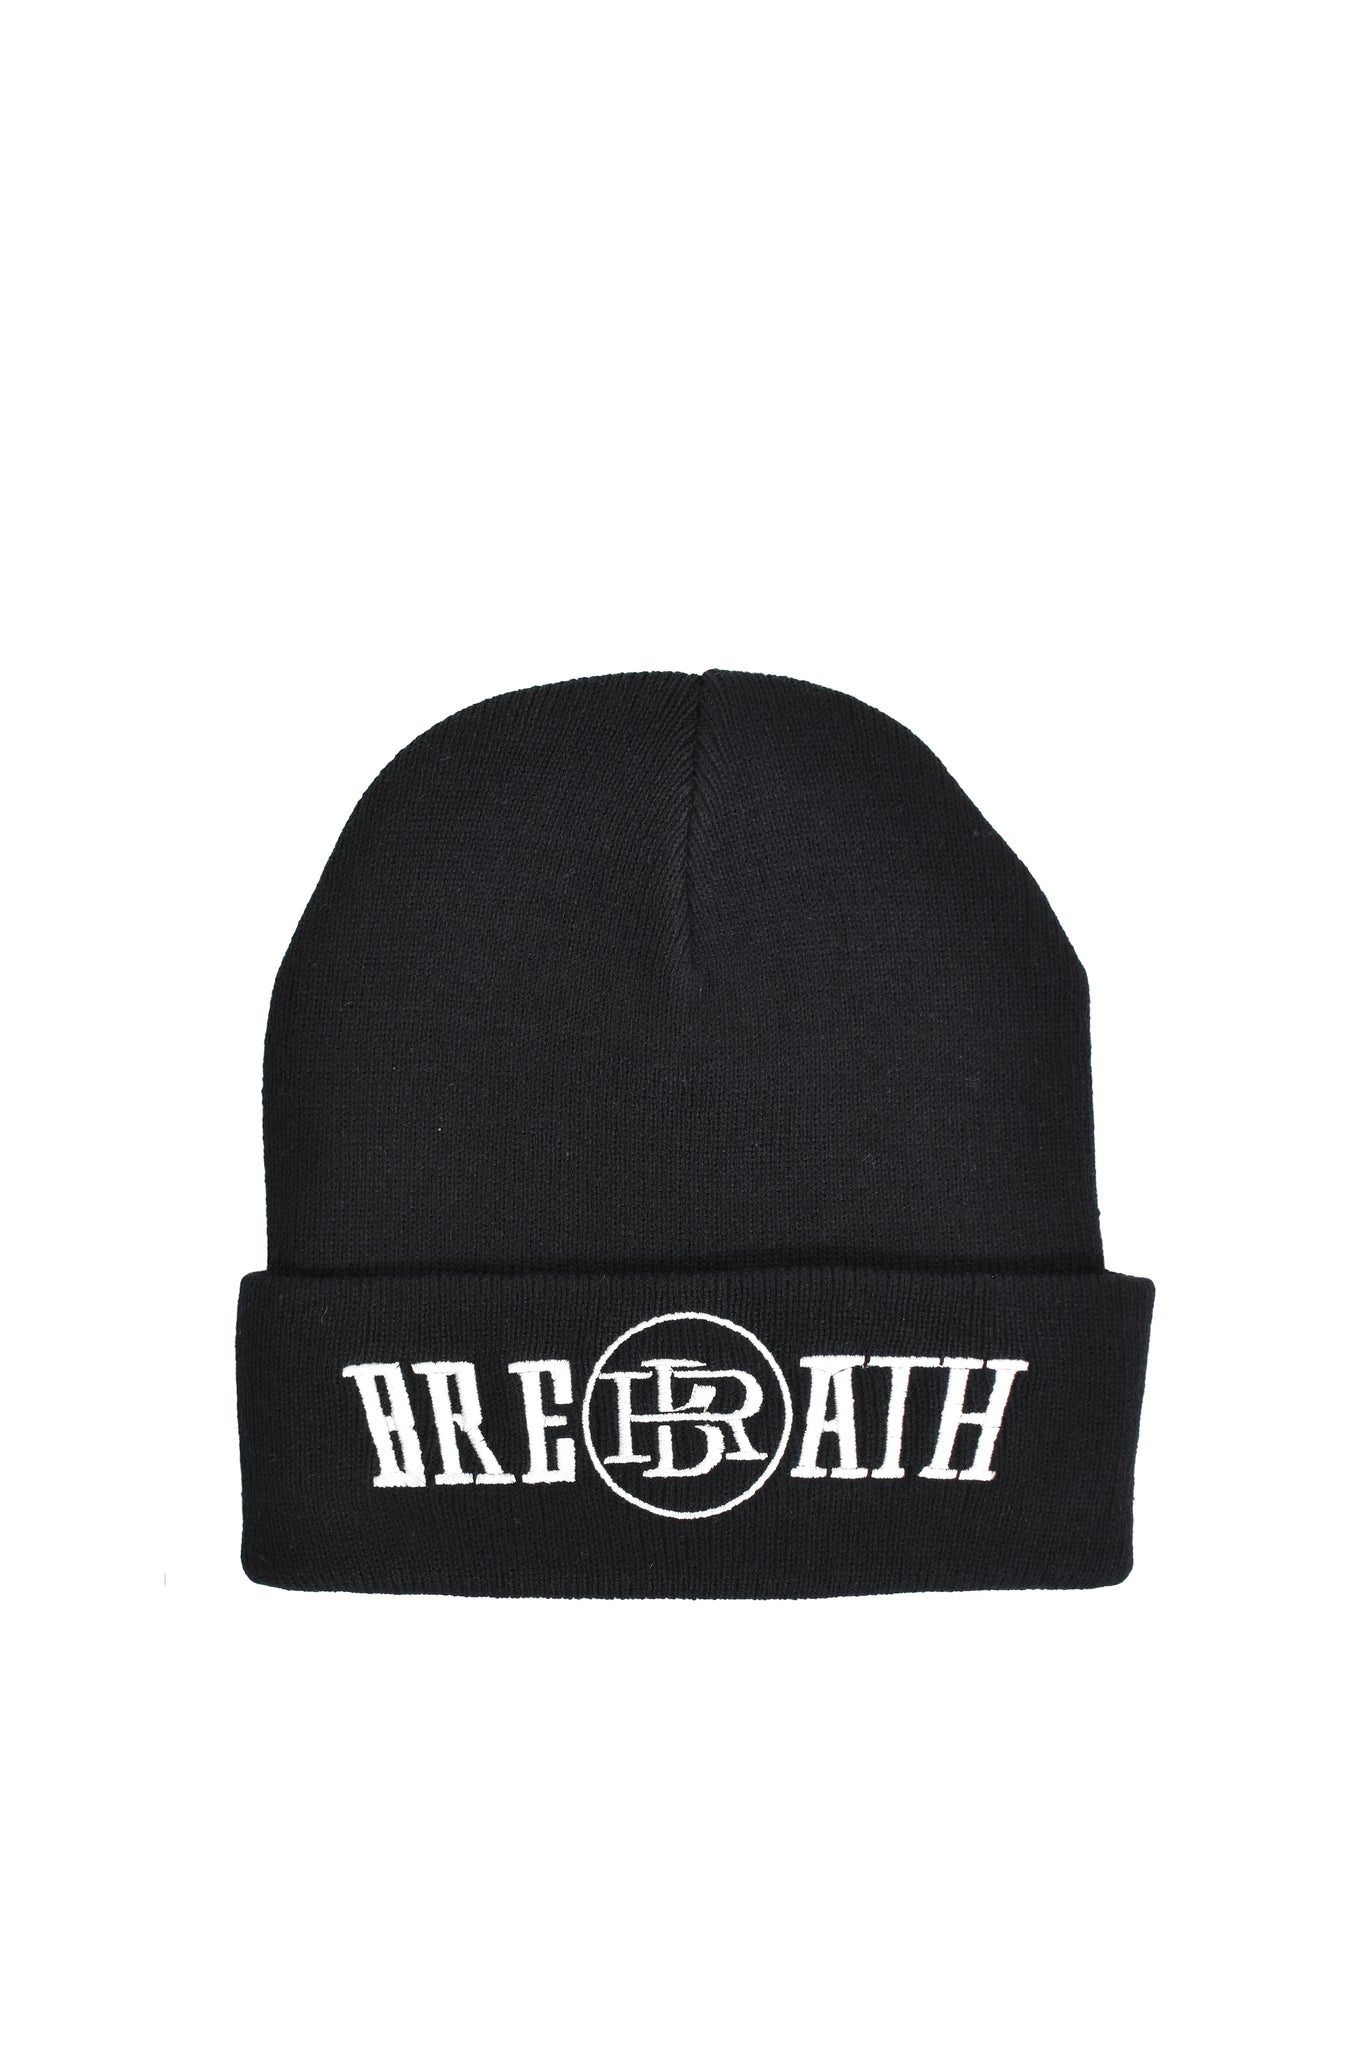 EMBROIDERY KNIT CAP / BLACK